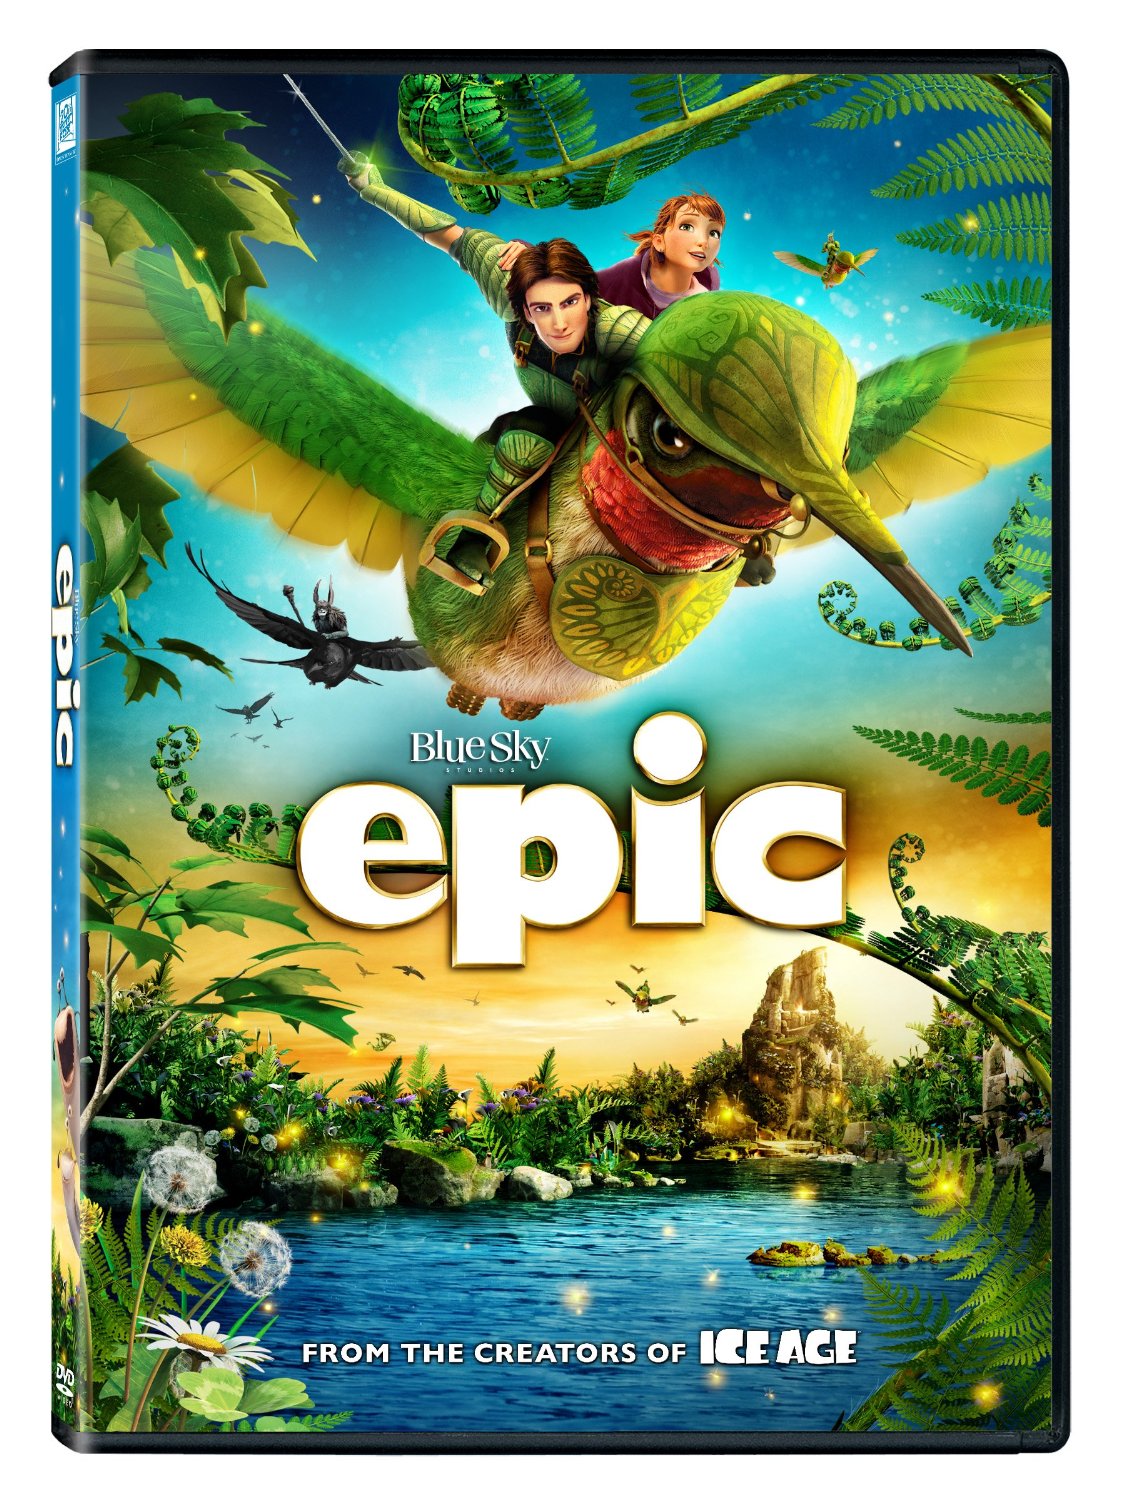 Epic on DVD Only $6.96 – 77% Savings